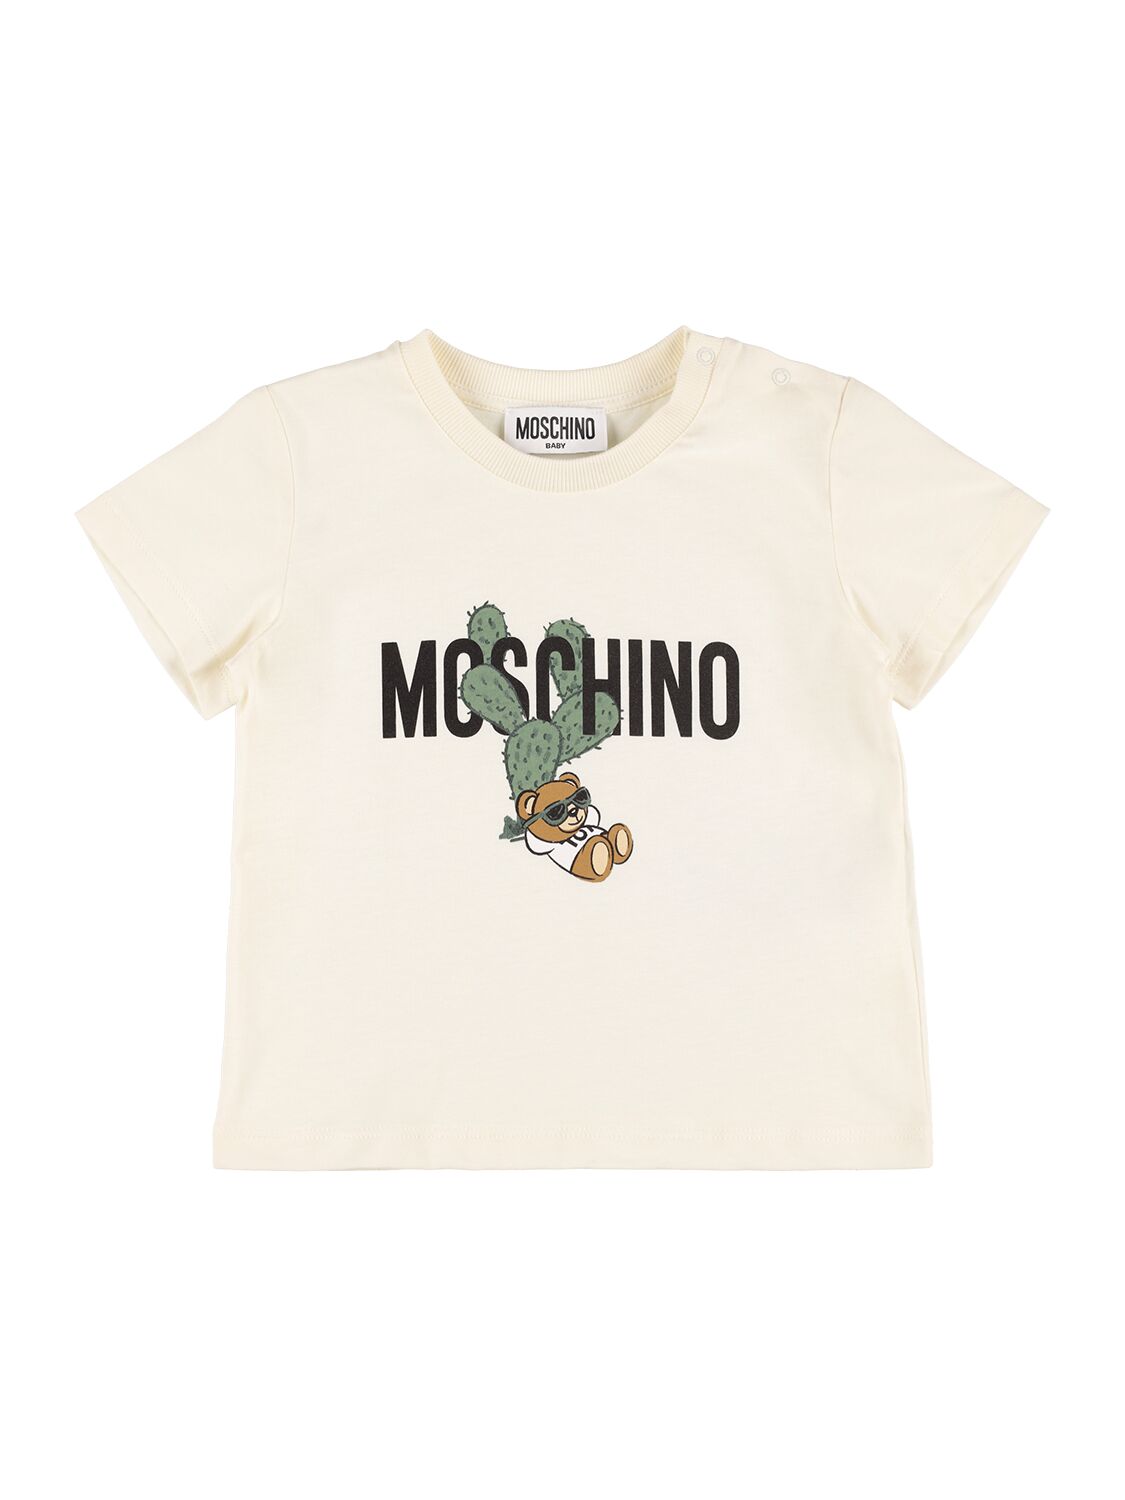 Moschino Kids' Cotton Jersey T-shirt In Off-white